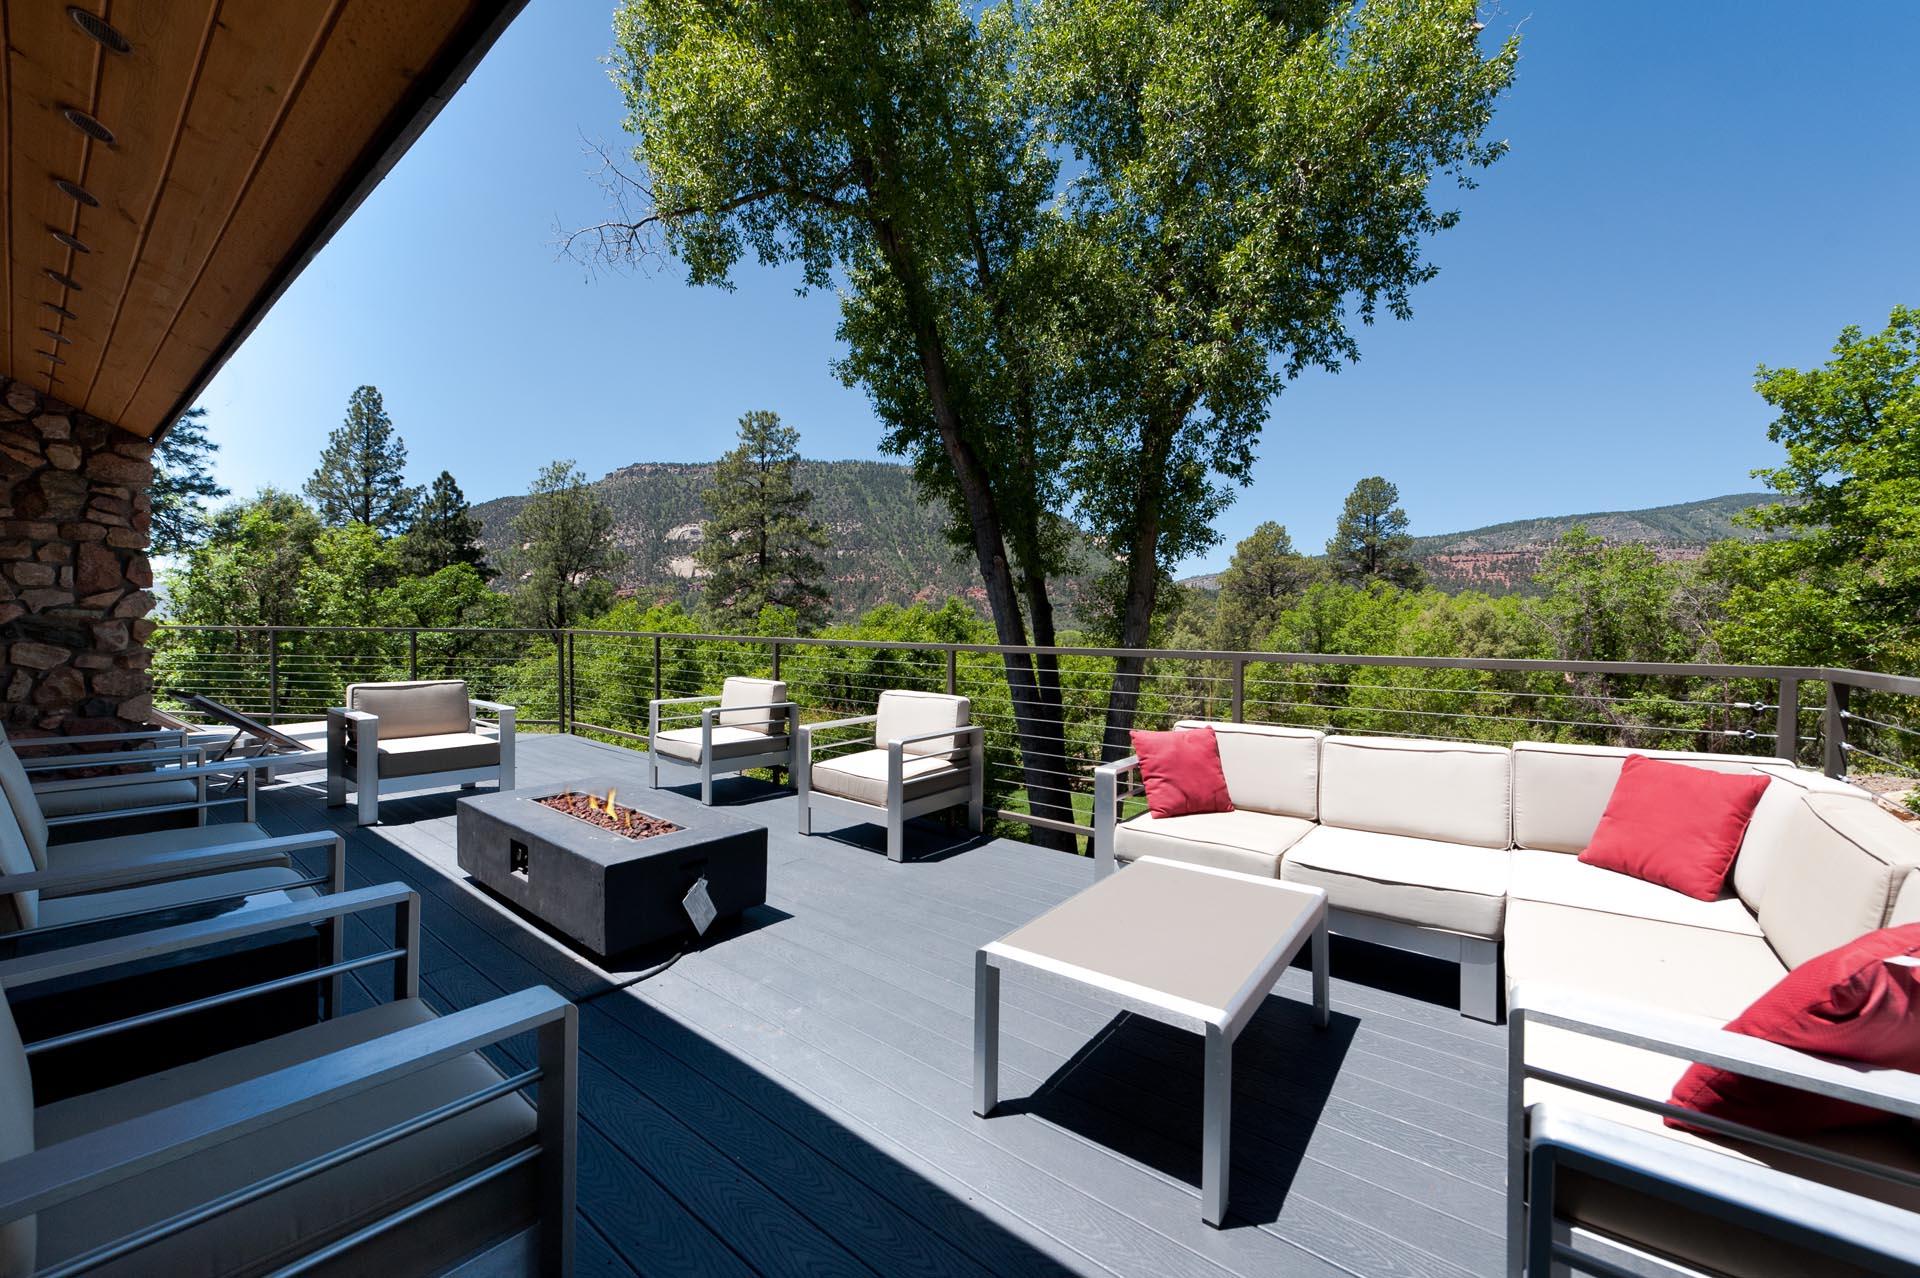 Huge deck with amazing views, gas firepit and plenty of seating